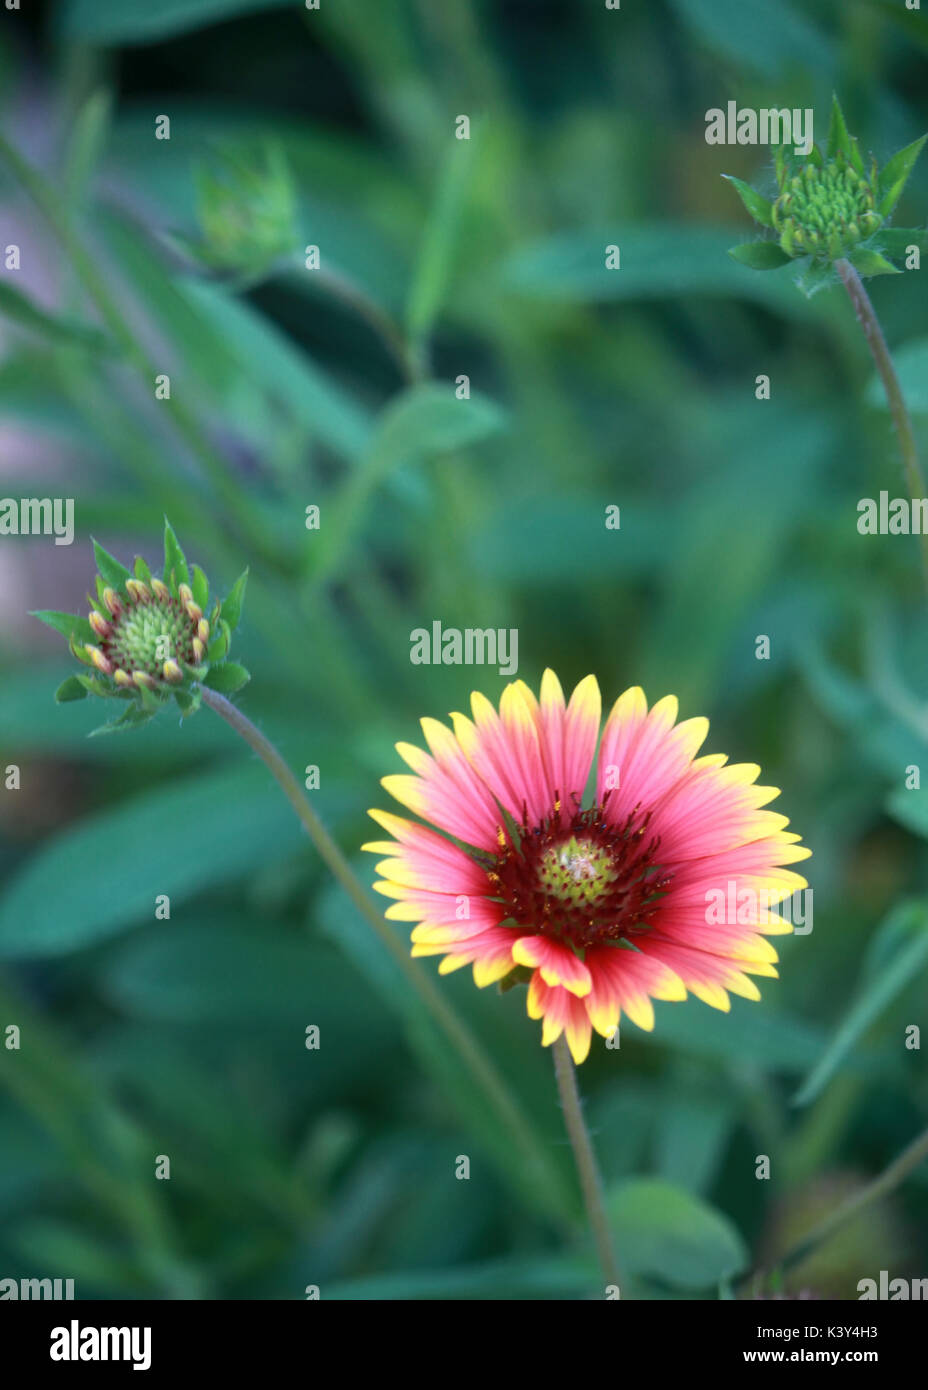 A single Gaillardia or blanket flower bloom shines in the midst of the green leaves. Stock Photo